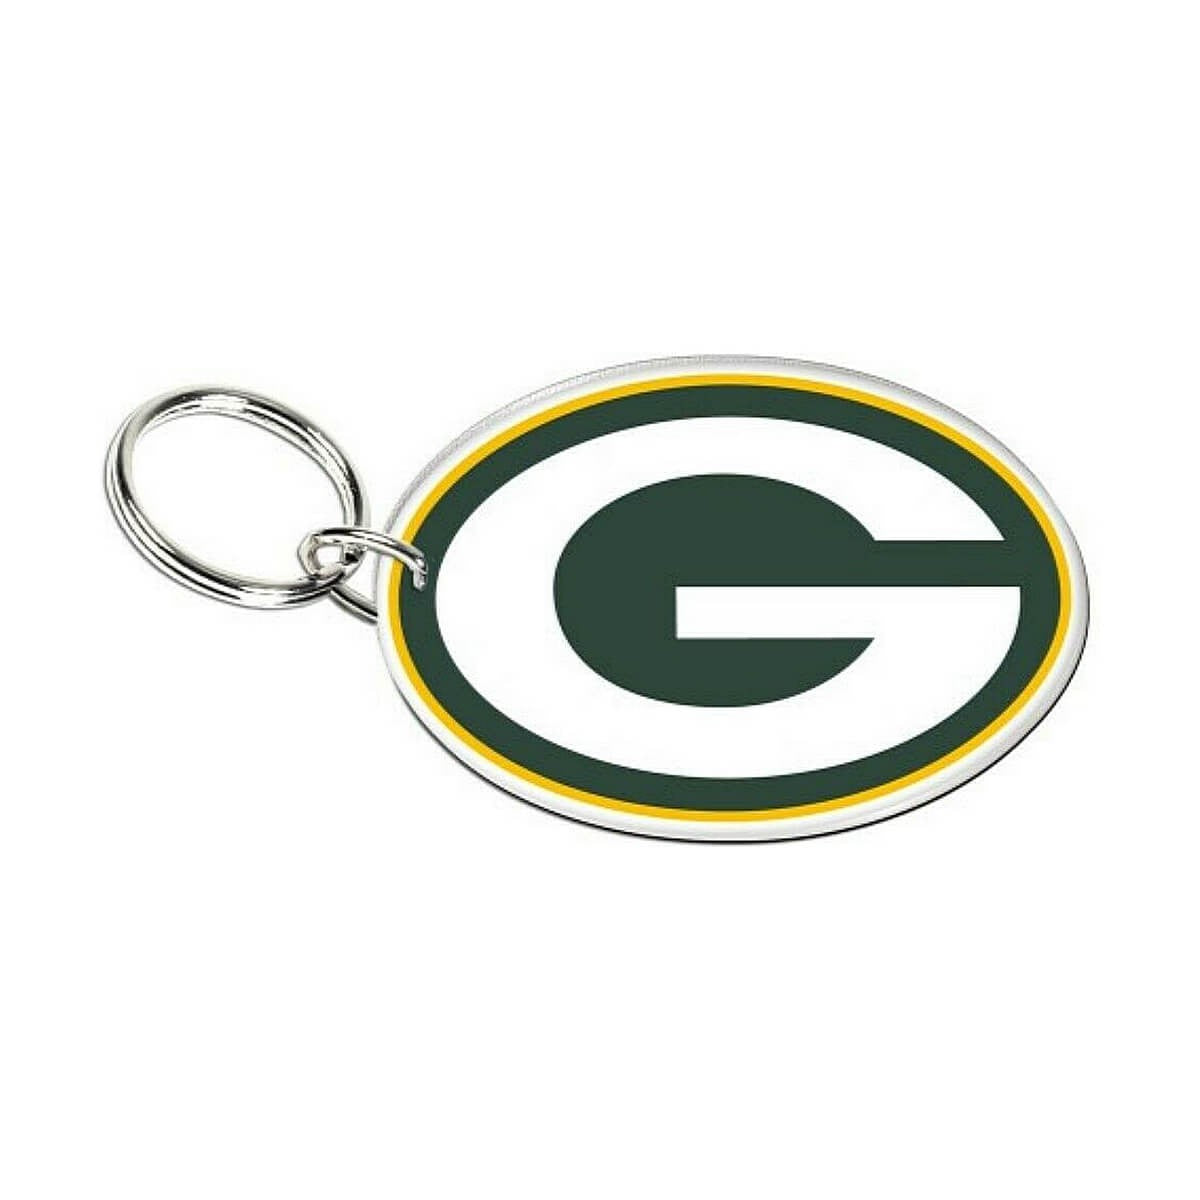 Wincraft Nfl Key Chain Green Bay Packers